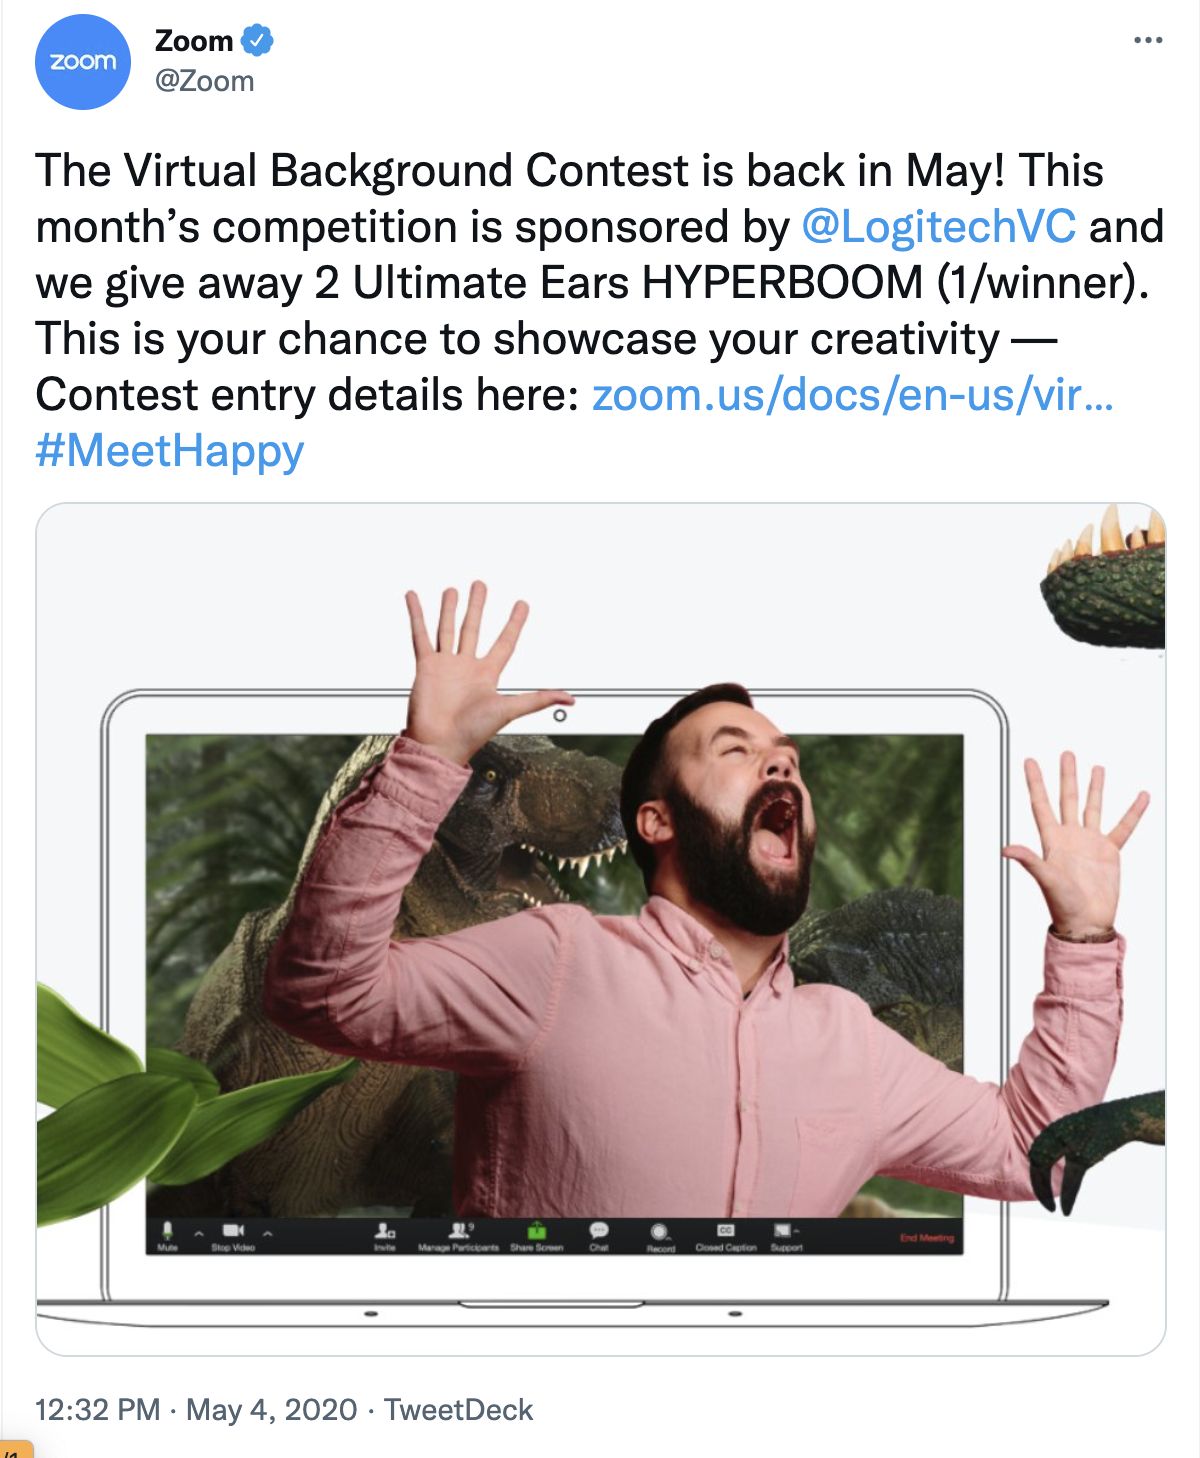 Zoom's virtual background contest became a viral marketing campaign